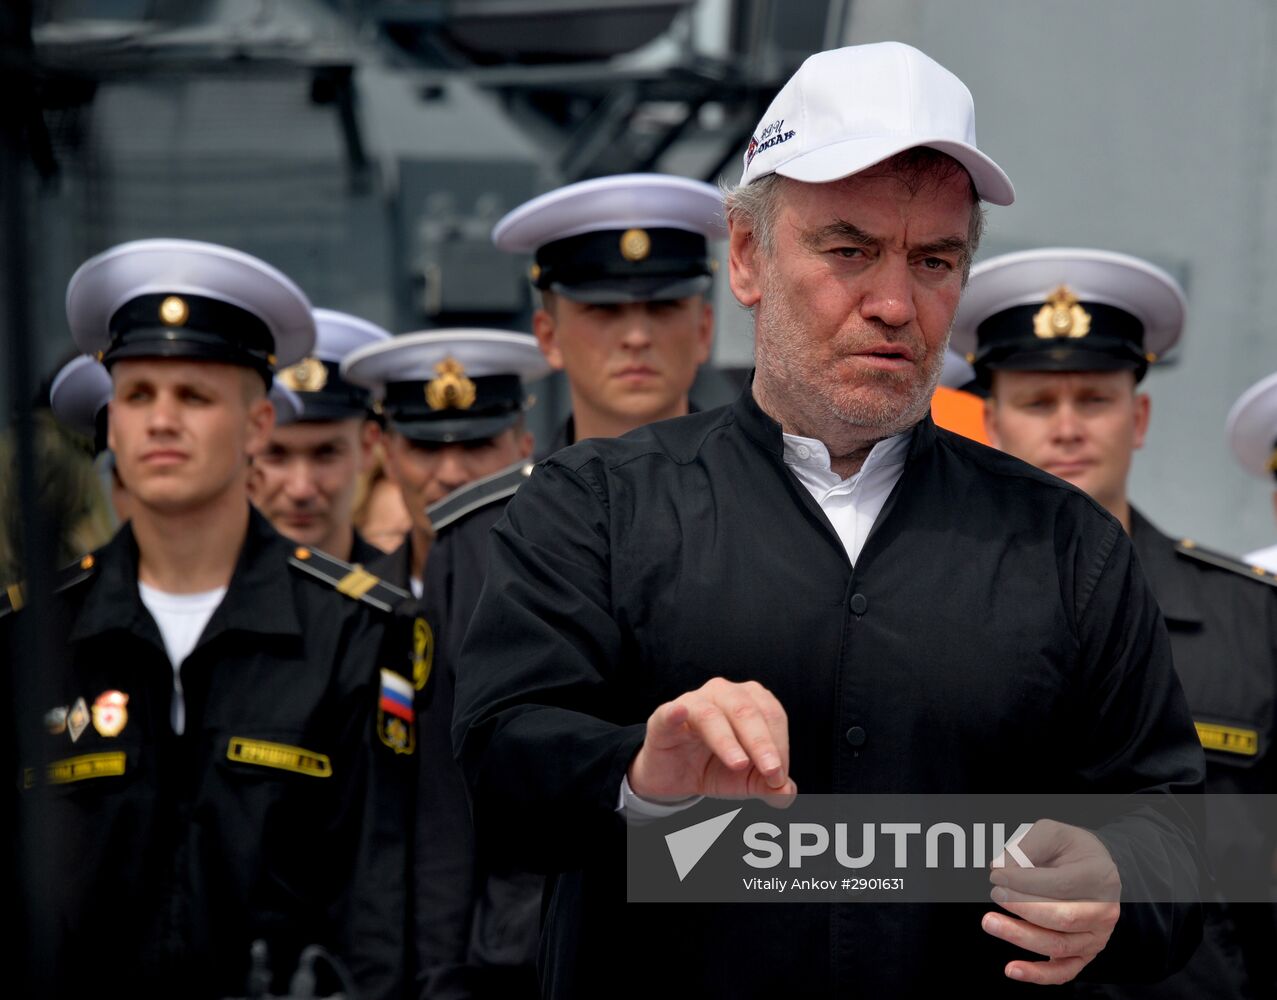 Navy Day celebrated in Russian cities